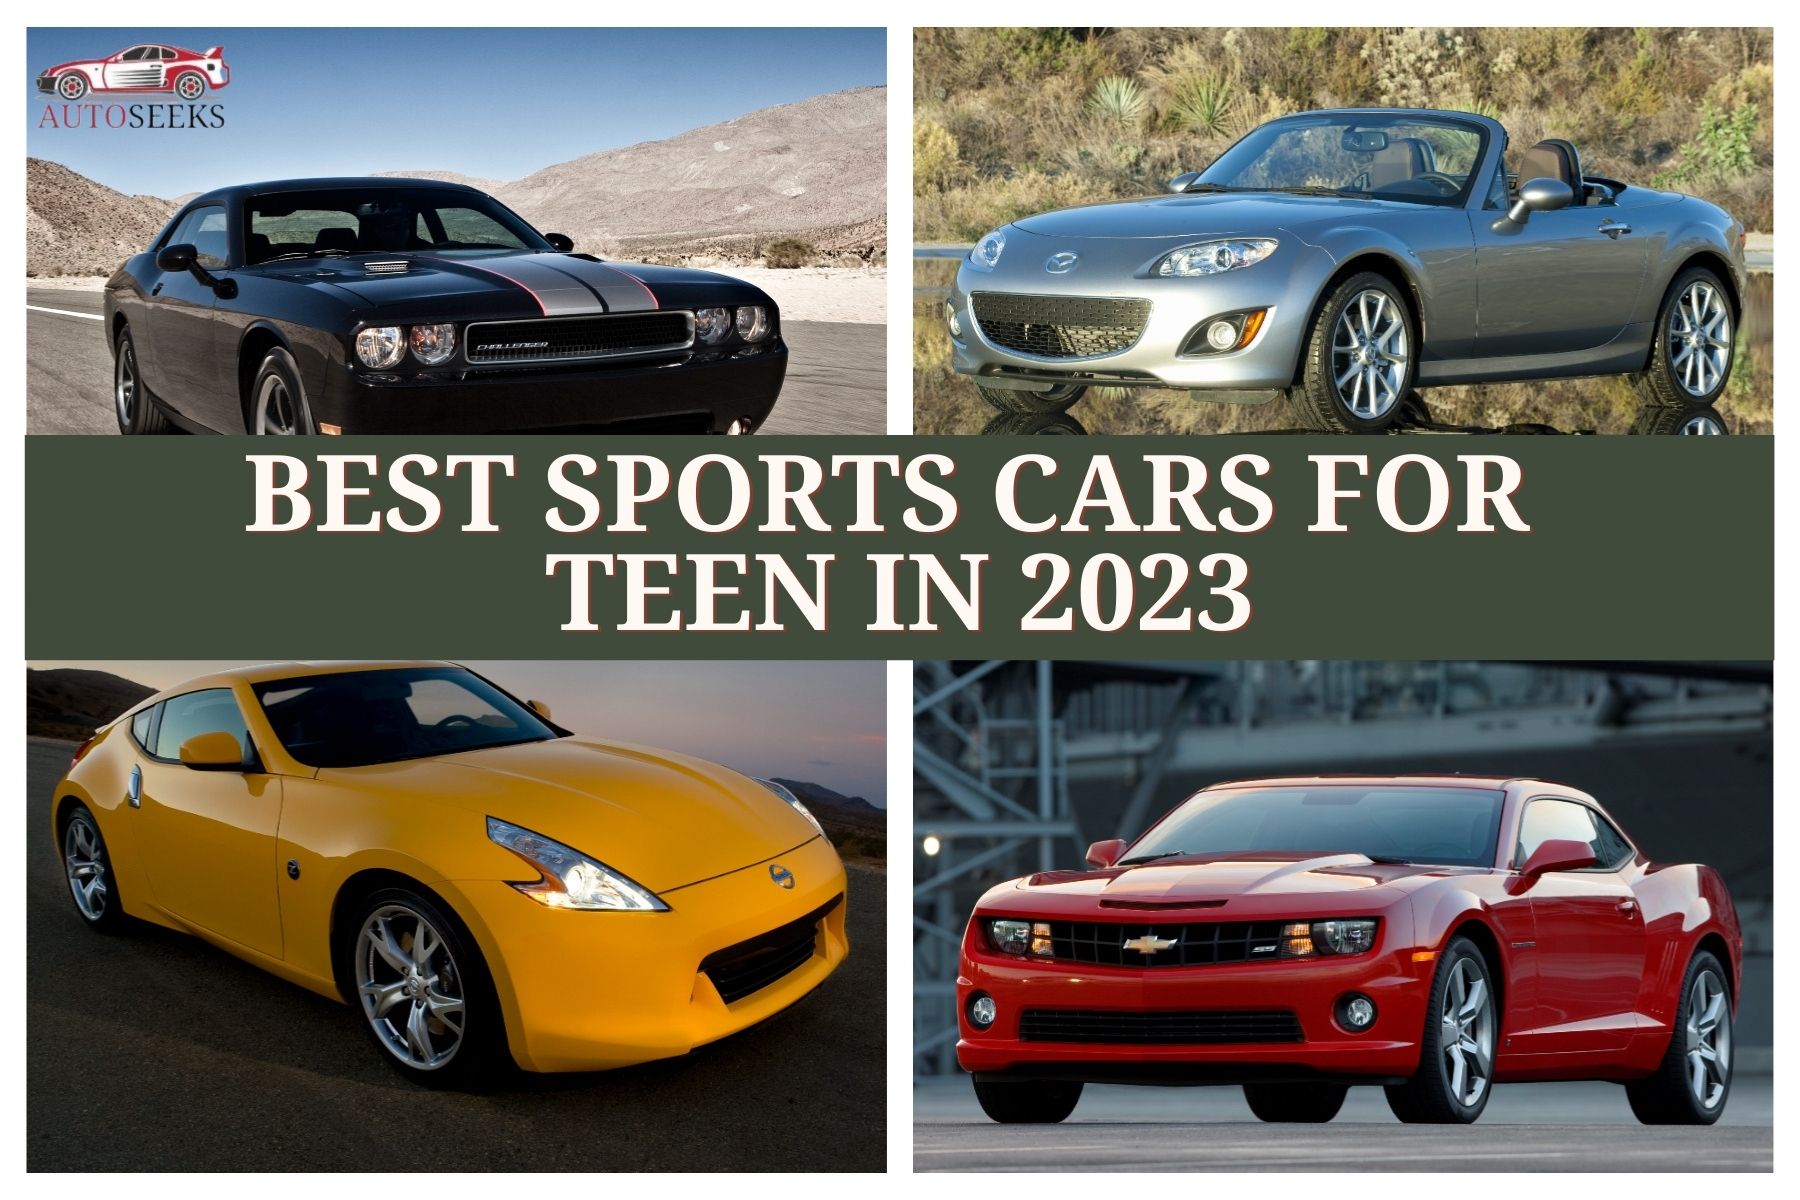 Best Sports Cars For Teen In 2023